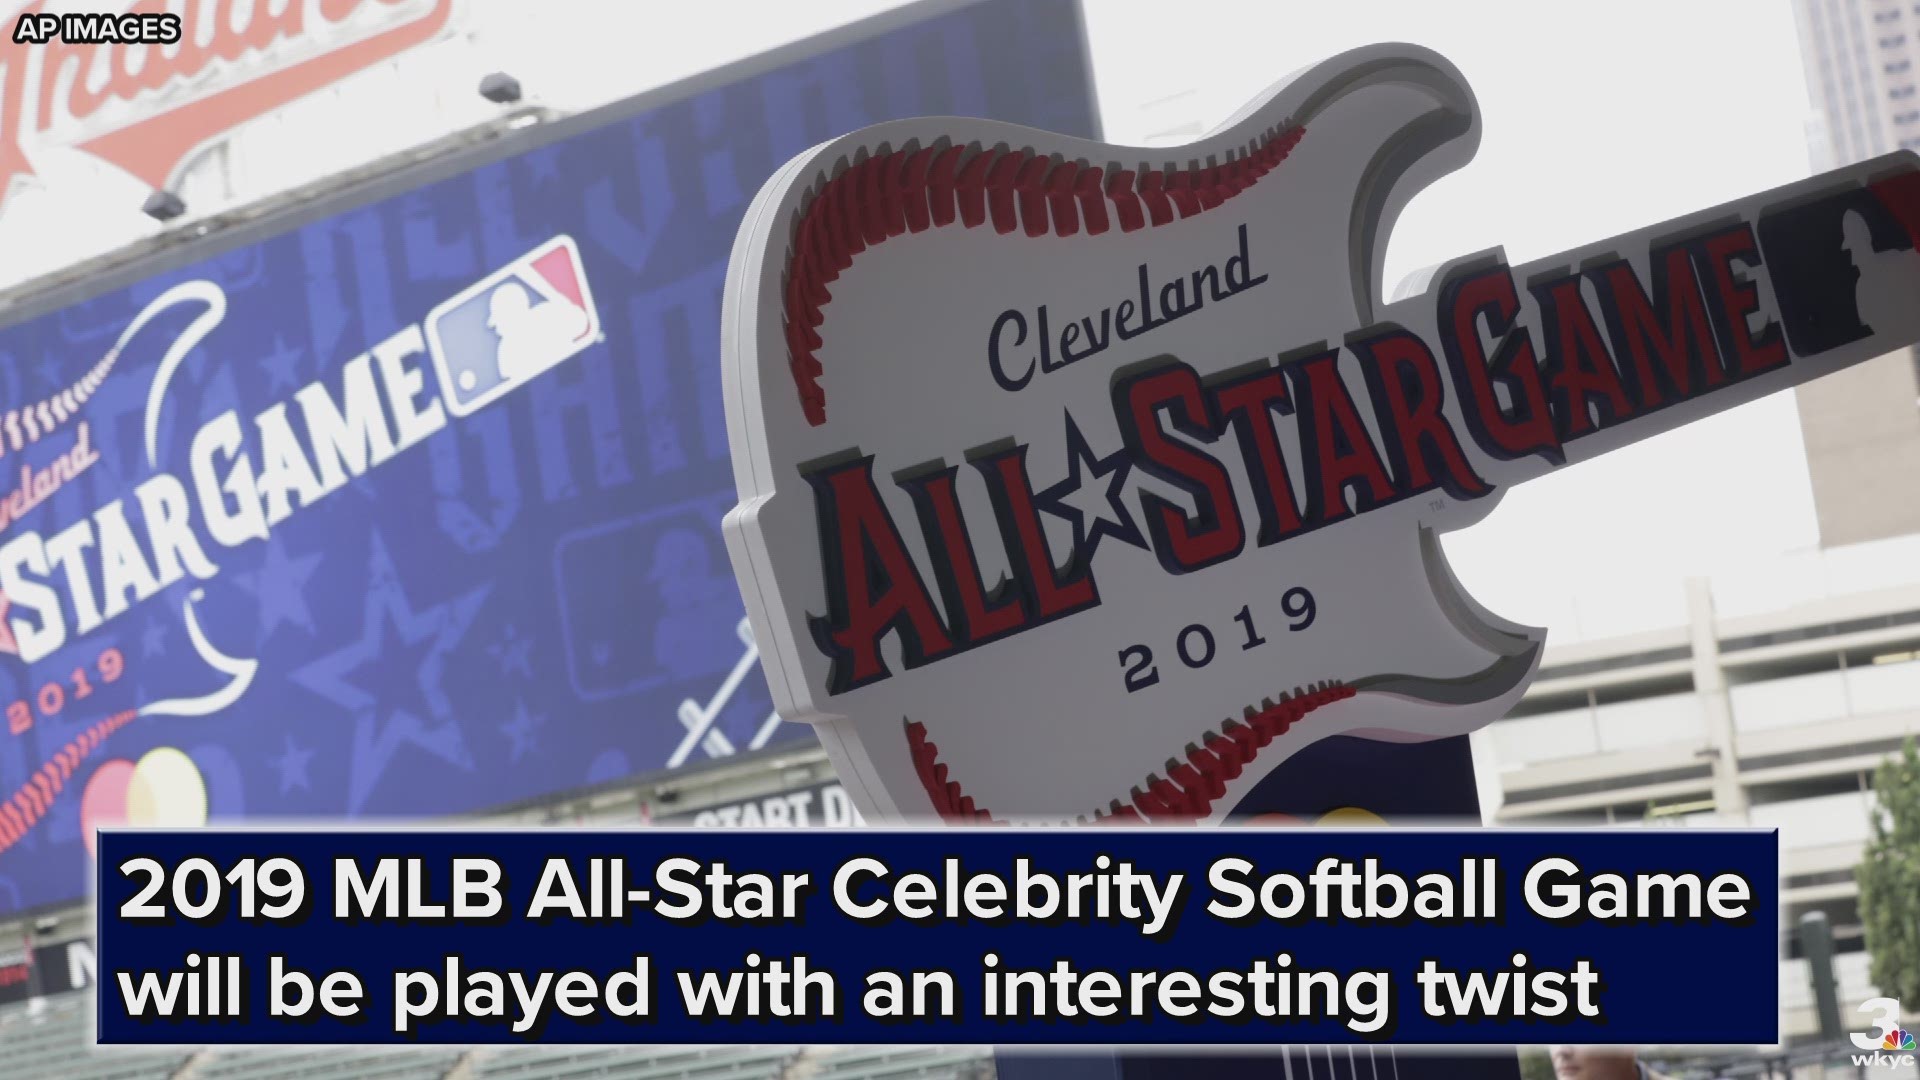 The 2019 MLB Celebrity Softball Game in Cleveland this summer will be played with an interesting twist.